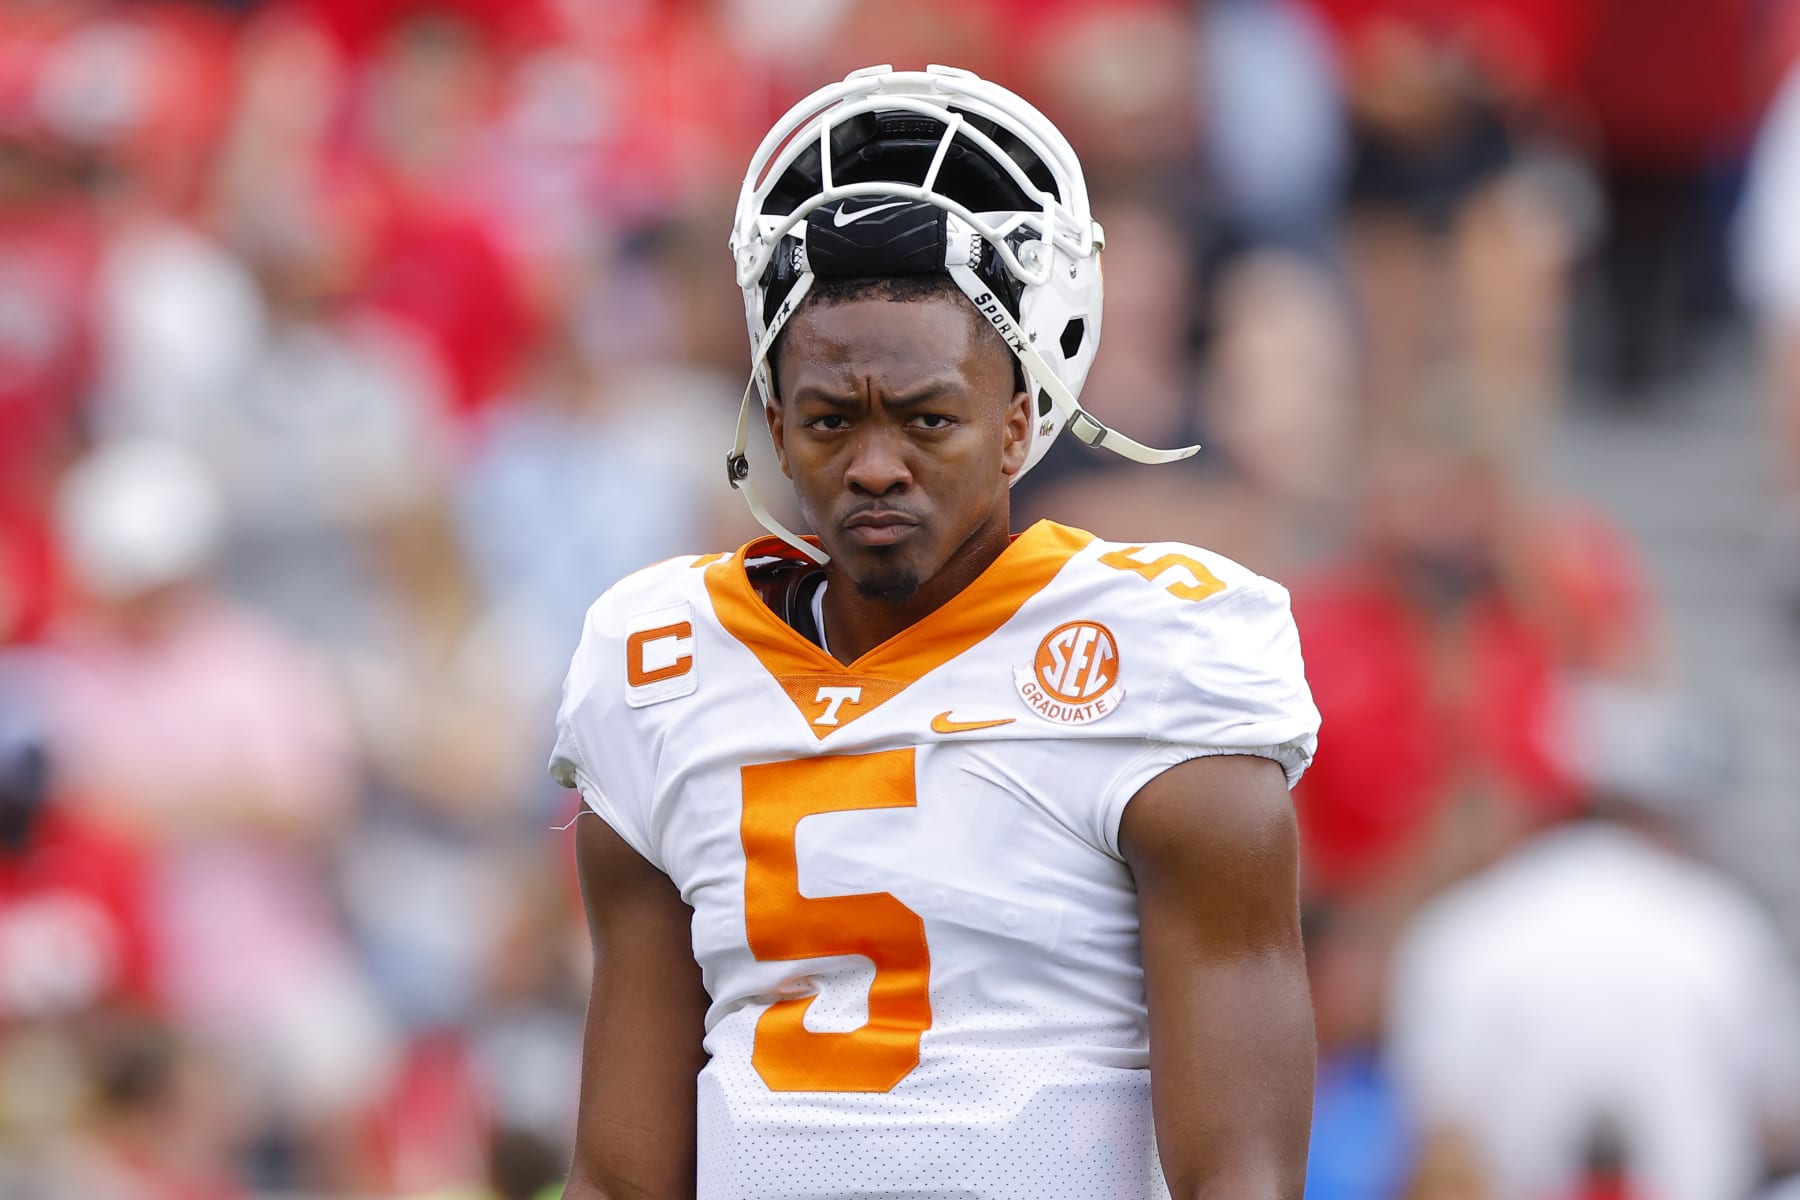 NFL Draft: Tennessee QB Hendon Hooker explains why his stock has